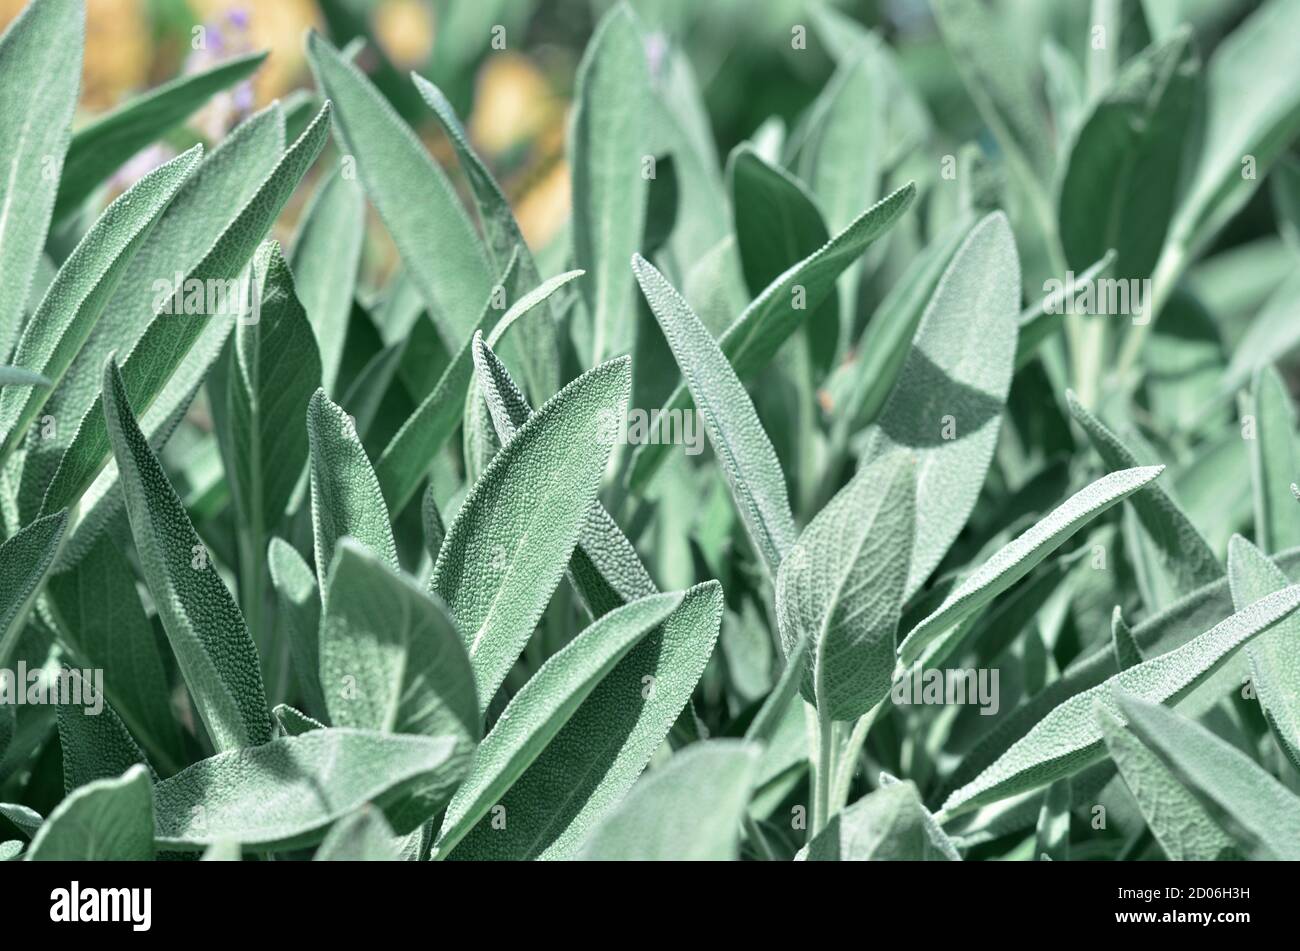 Salvia officinalis or common sage - perennial subshrub, that has elongated grey green leaves used in medicinal and culinary. Close-up, selective focus Stock Photo